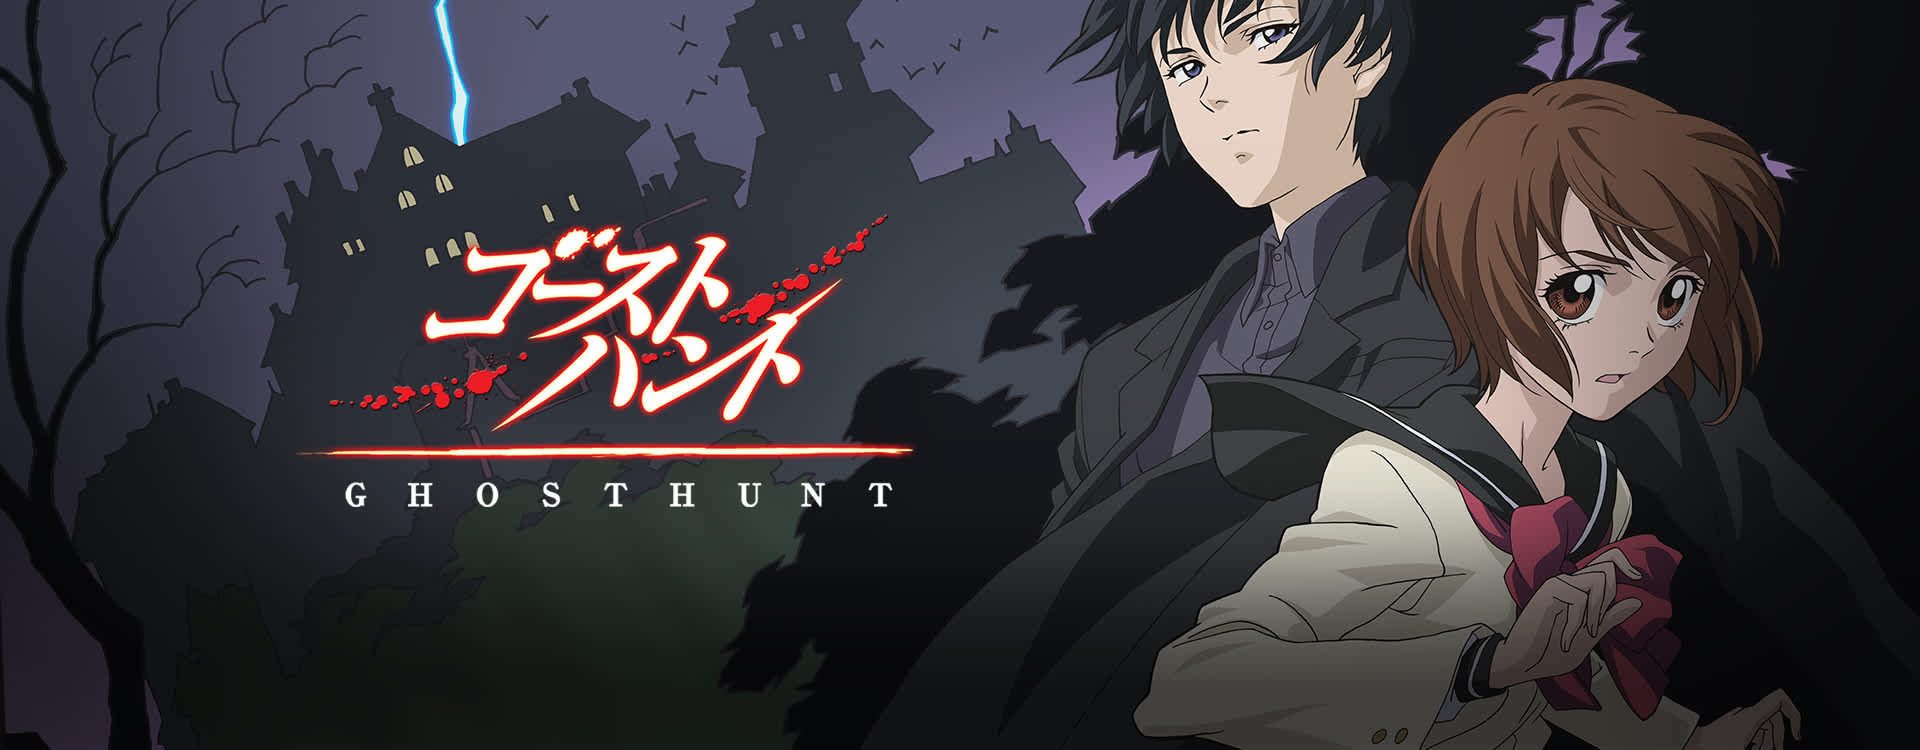 Image result for ghost hunt anime"